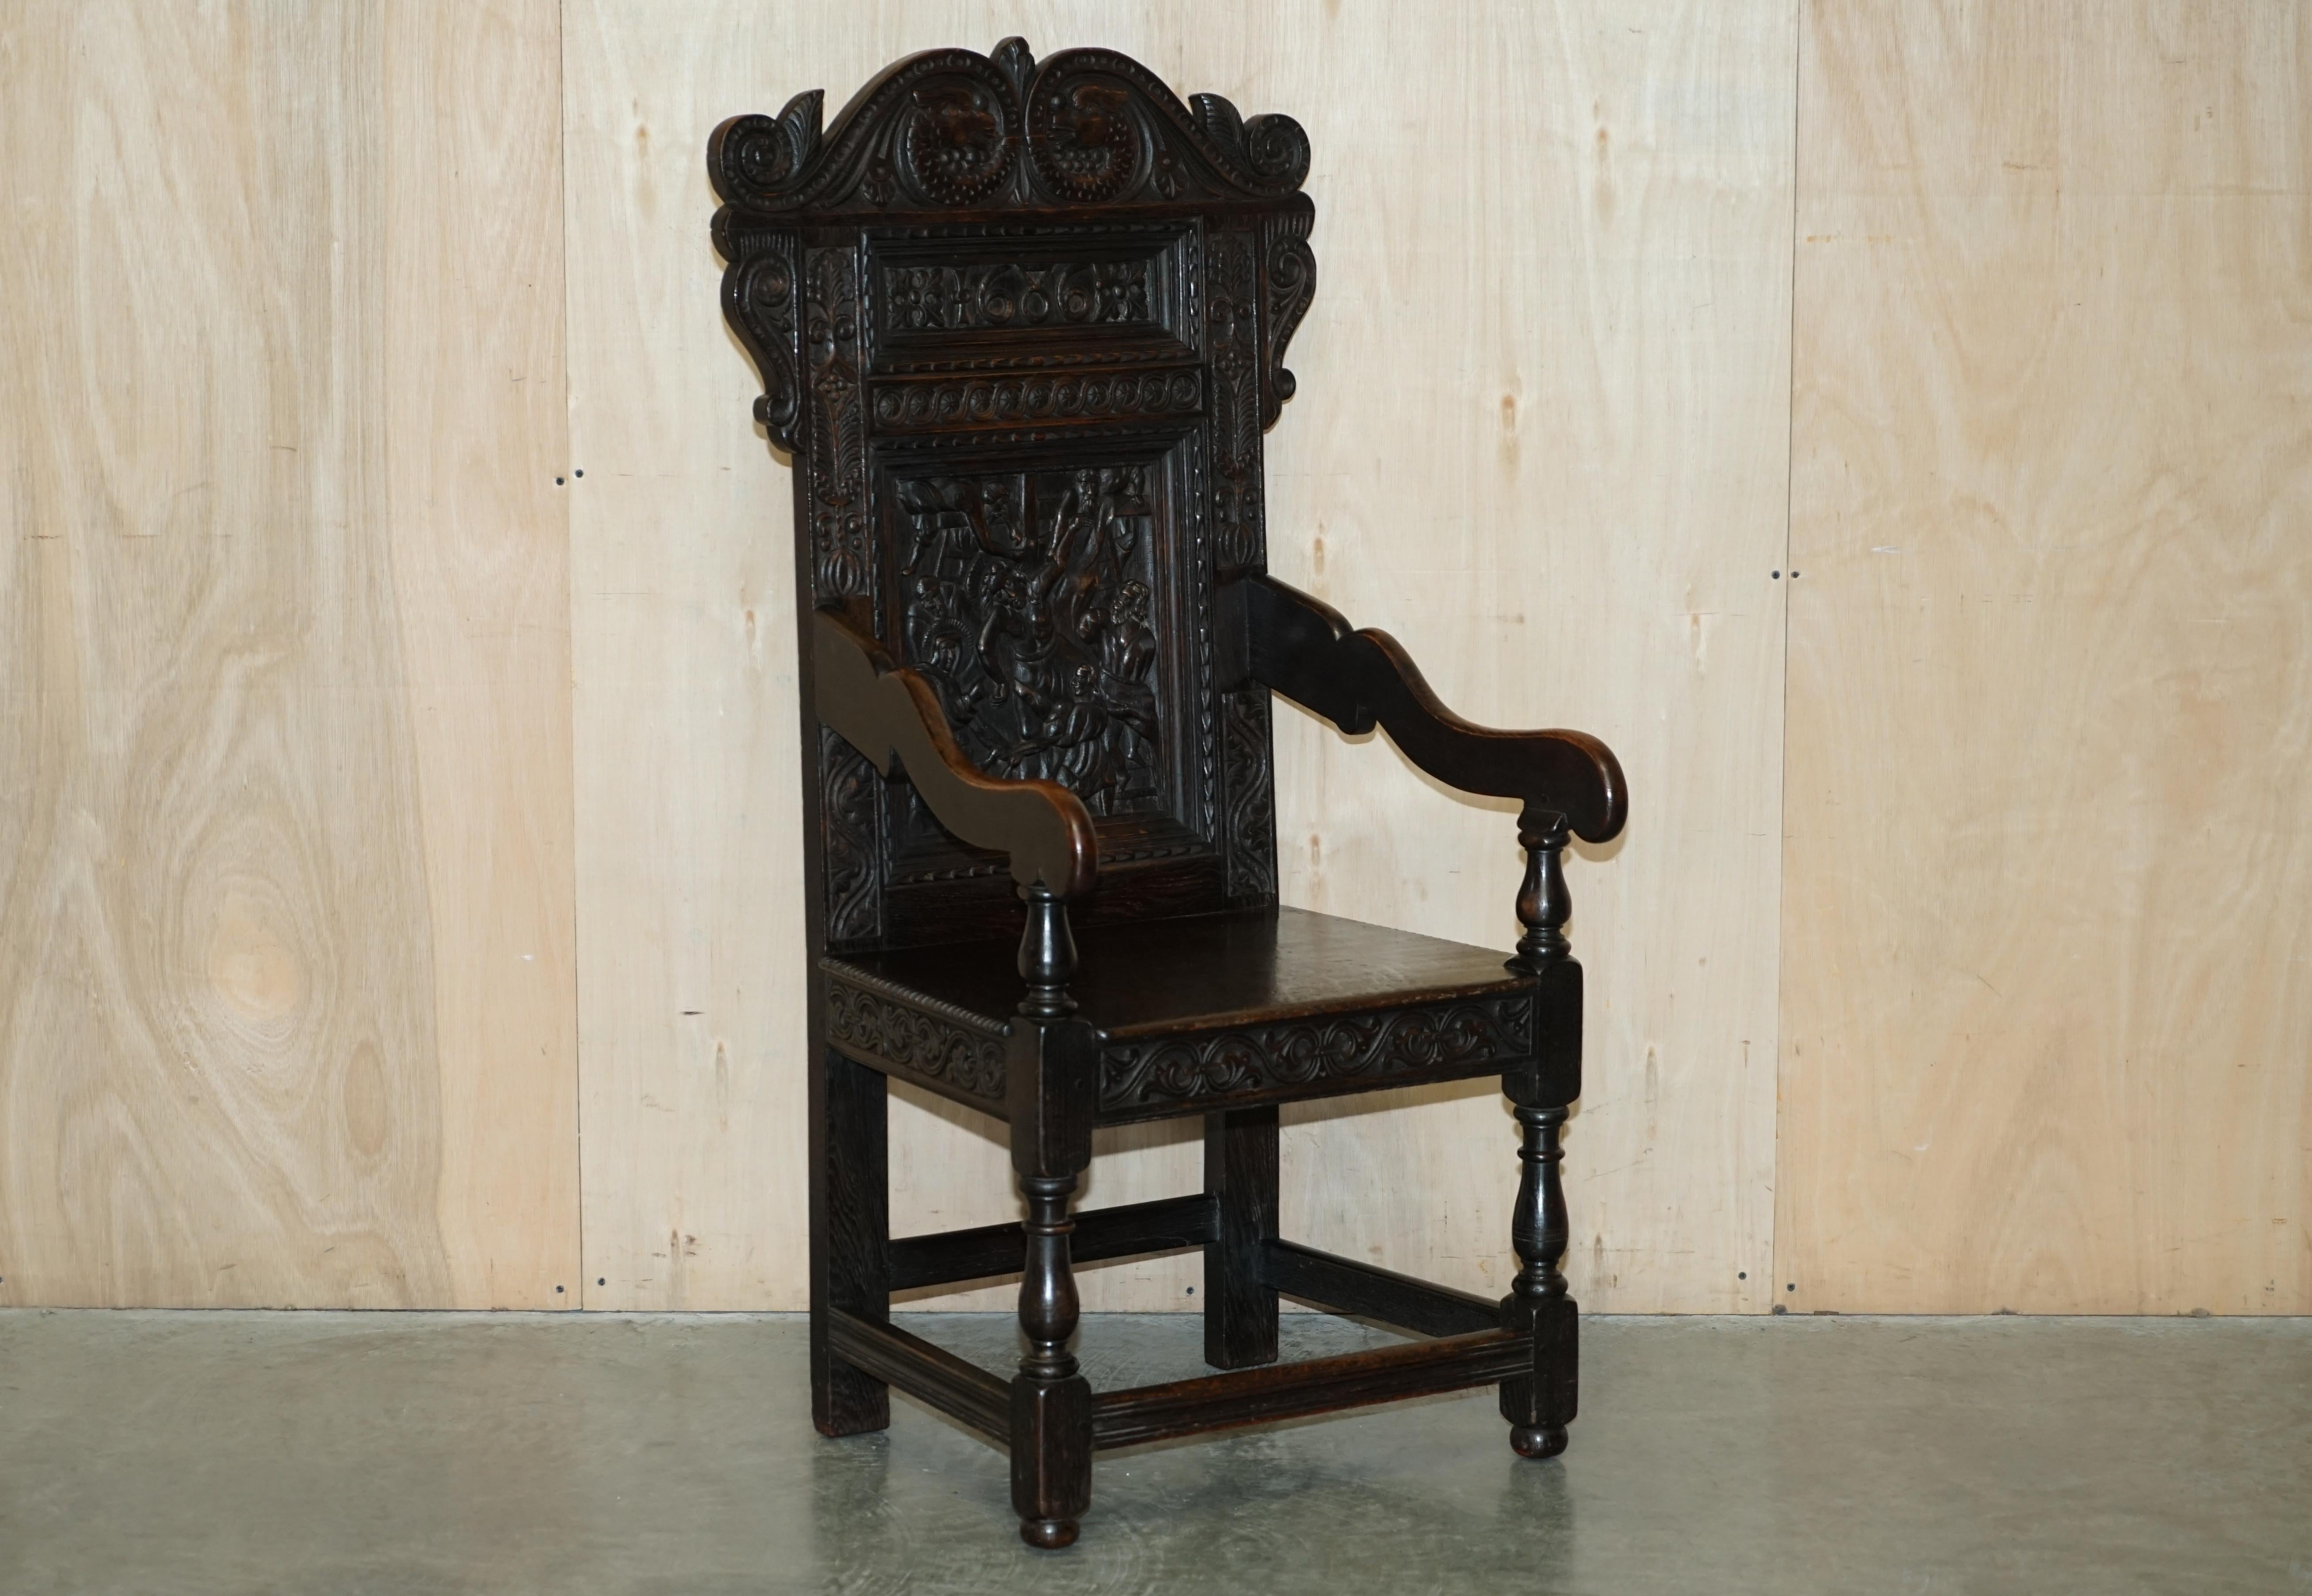 We are delighted to offer for sale this exceptionally rare, 1686 dated, Northern English hand carved from solid oak Wainscot armchair.

A highly decorative and original piece the back panel depicts some kind of scene which has a religious look and